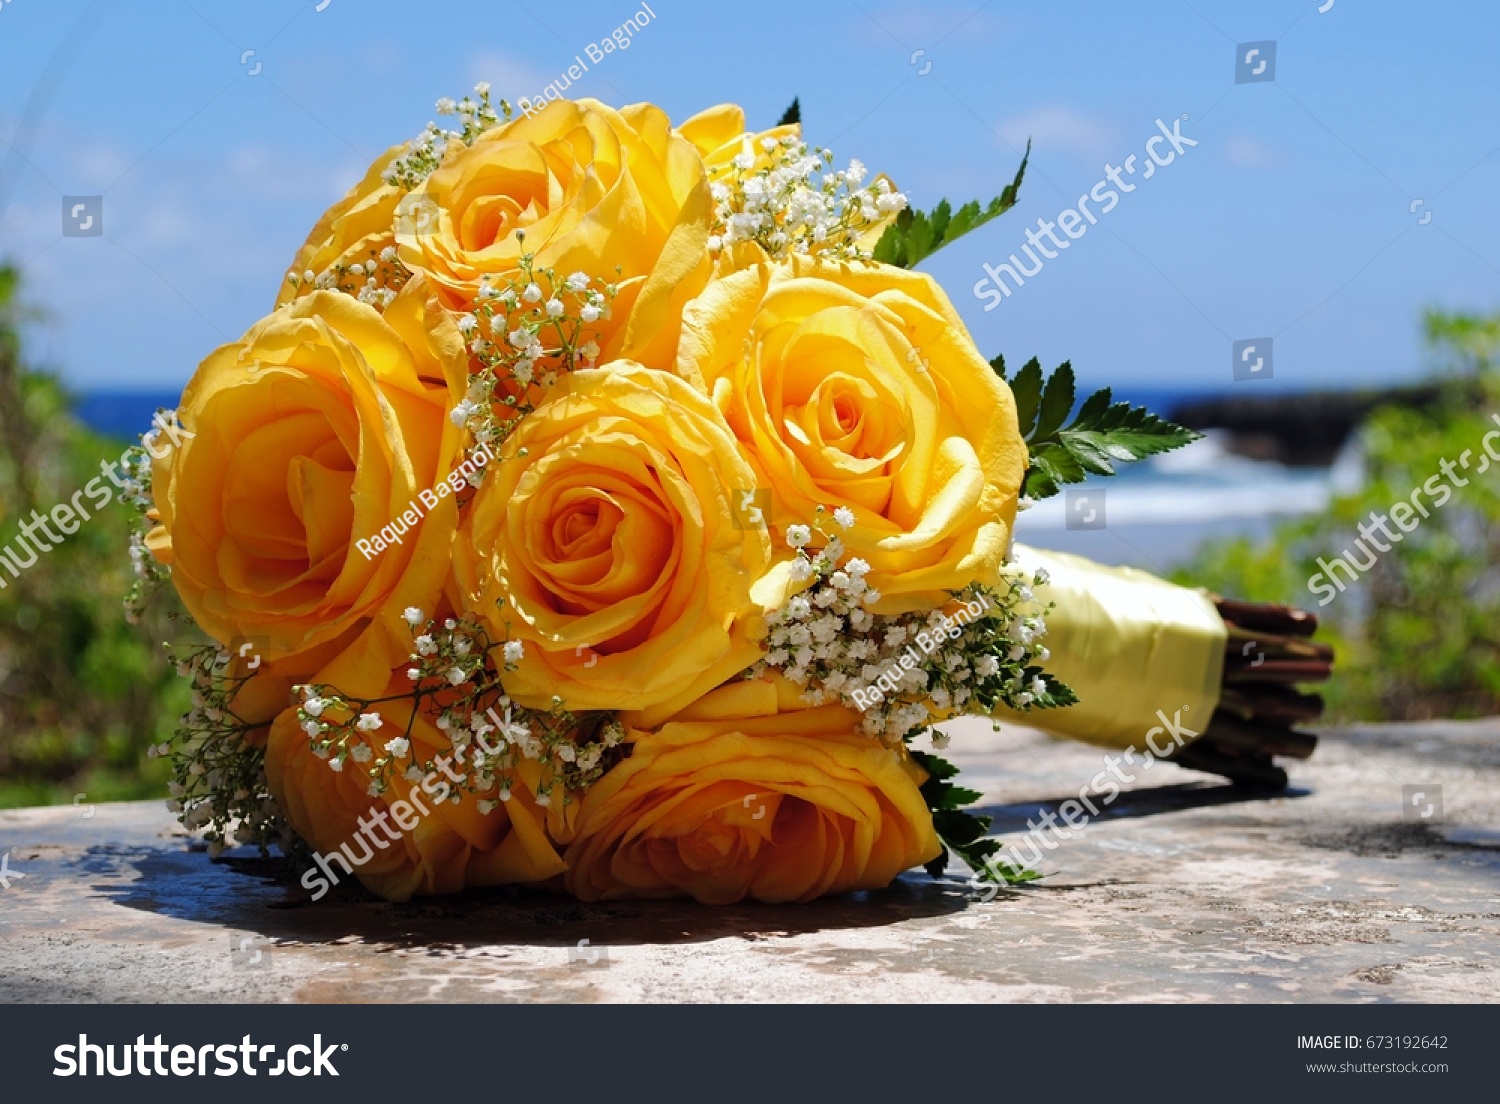 Download Yellow Roses Bridal Bouquet Side Shot Stock Photo Edit Now 673192642 PSD Mockup Templates